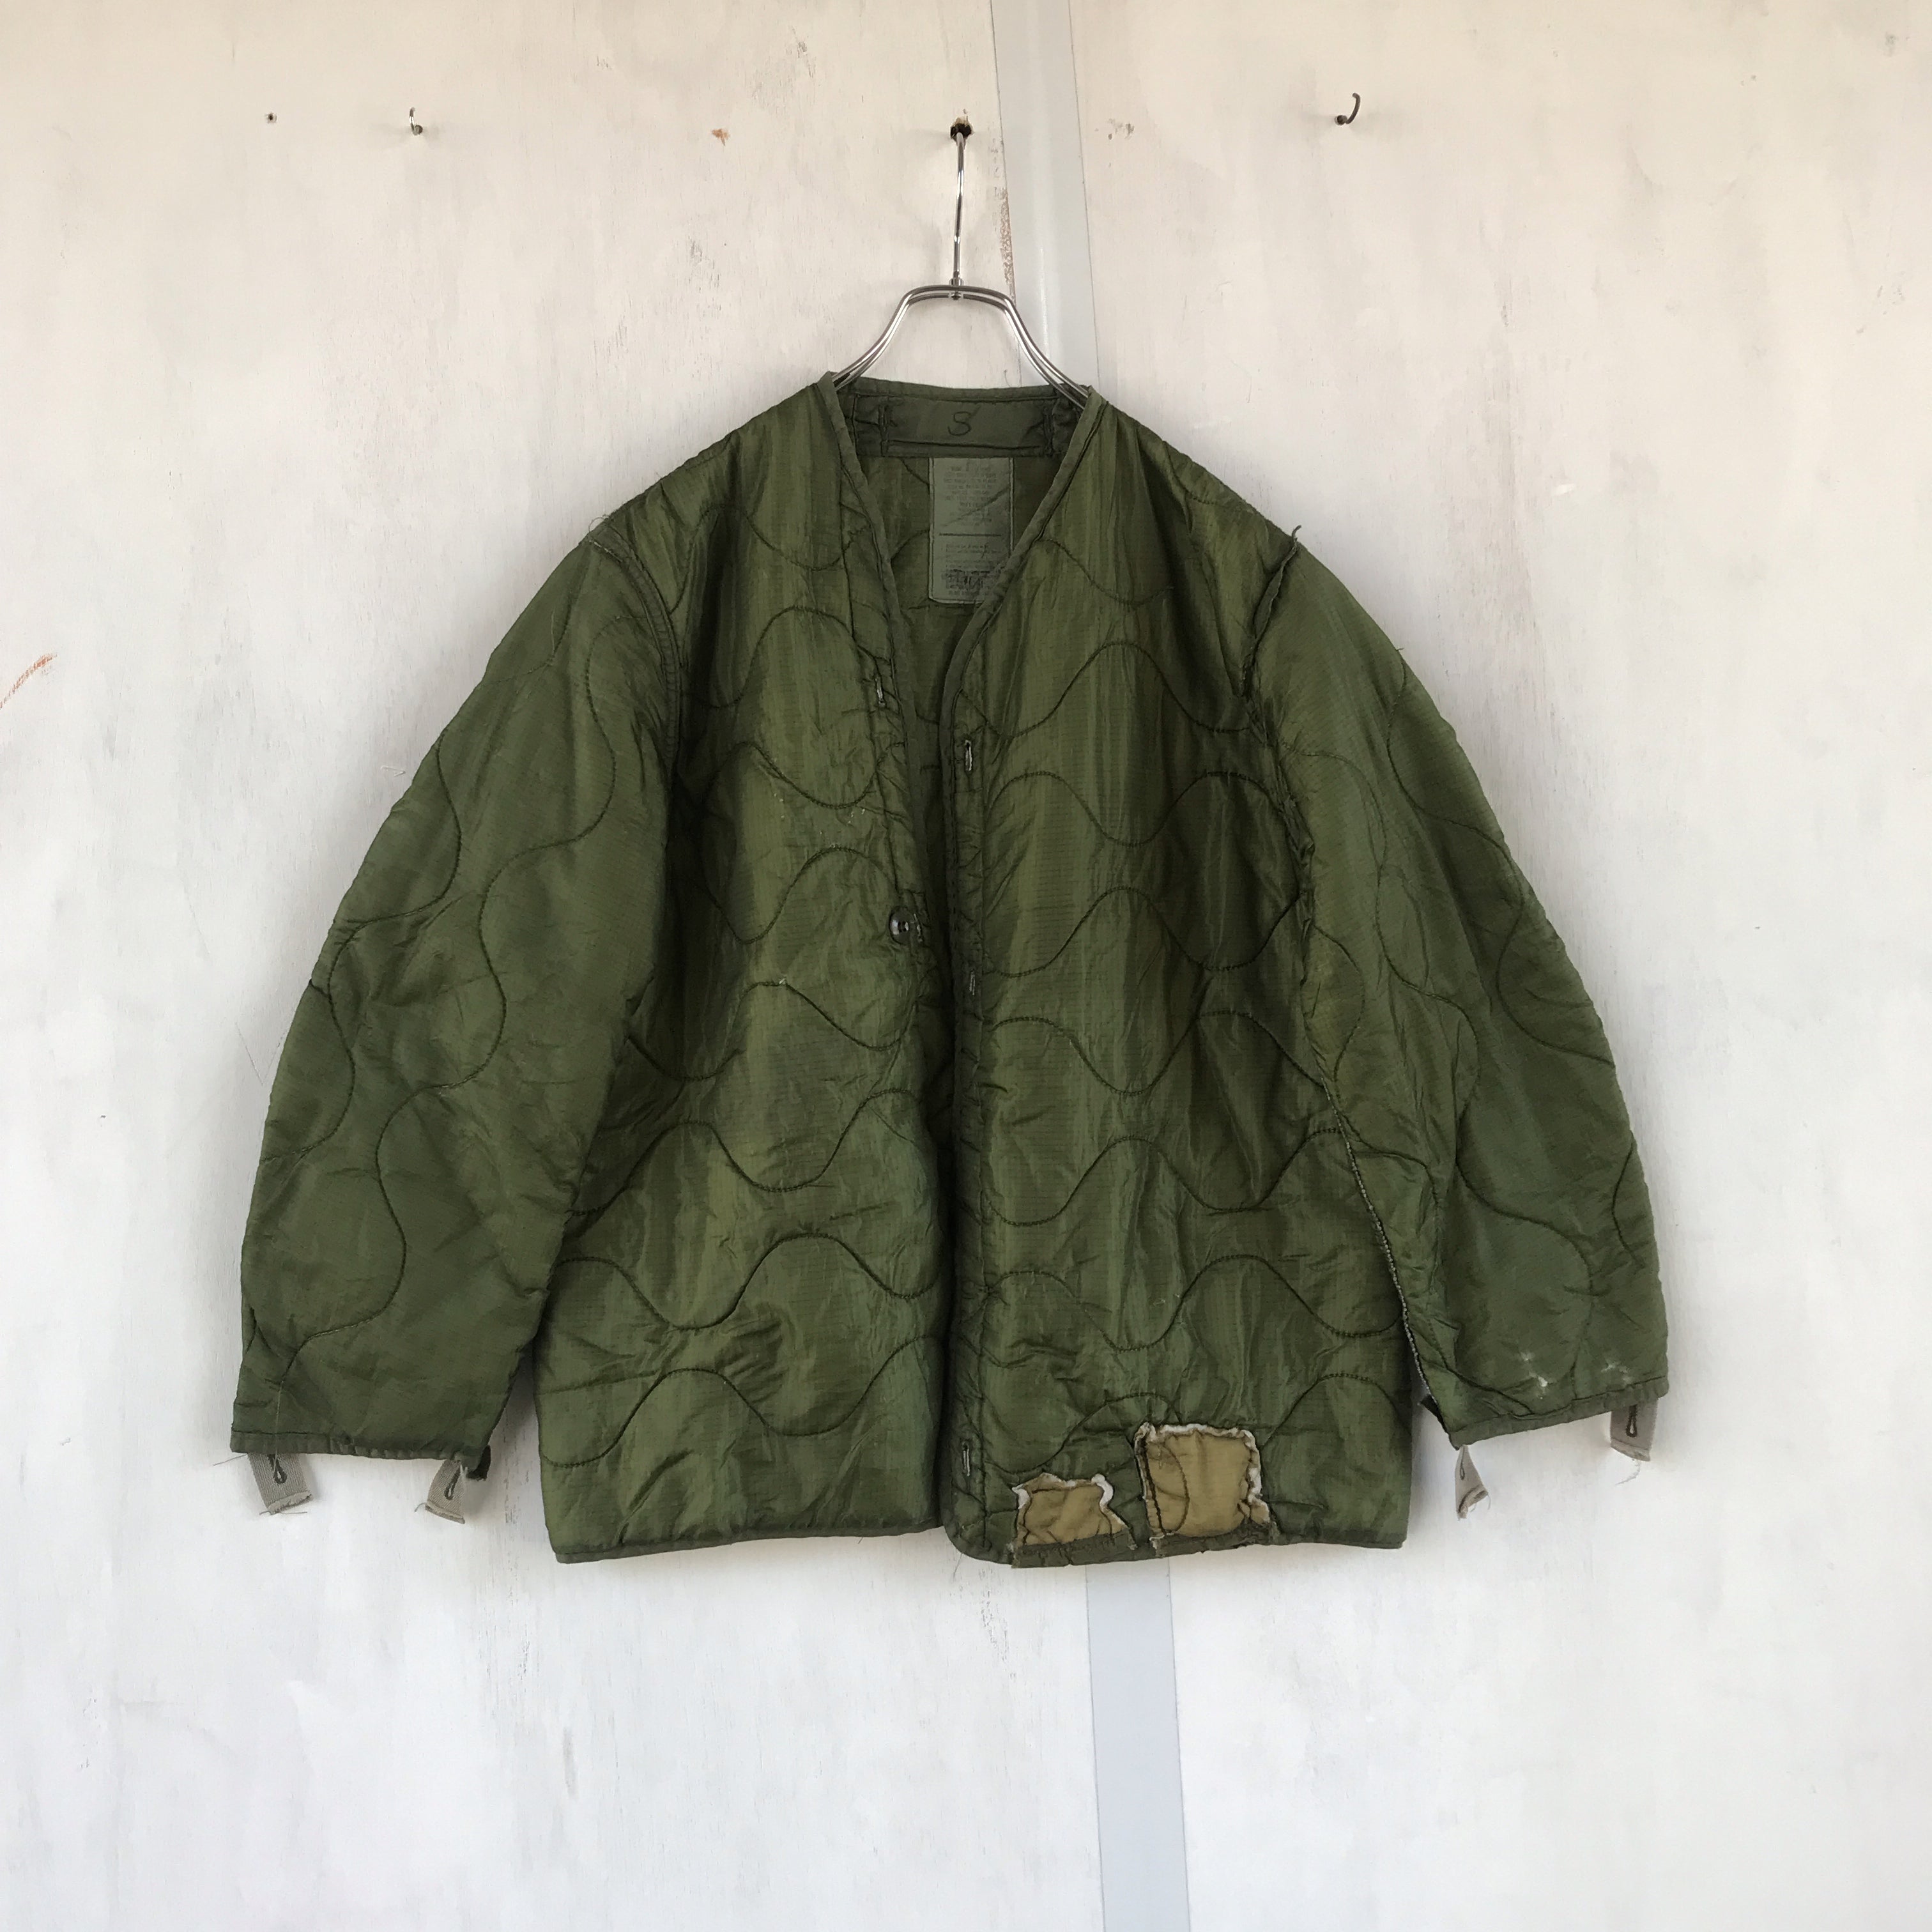 [ ONLY ONE ! ] 87's LINER, COLD WEATHER COAT, MAN'S /U.S.MILITARY